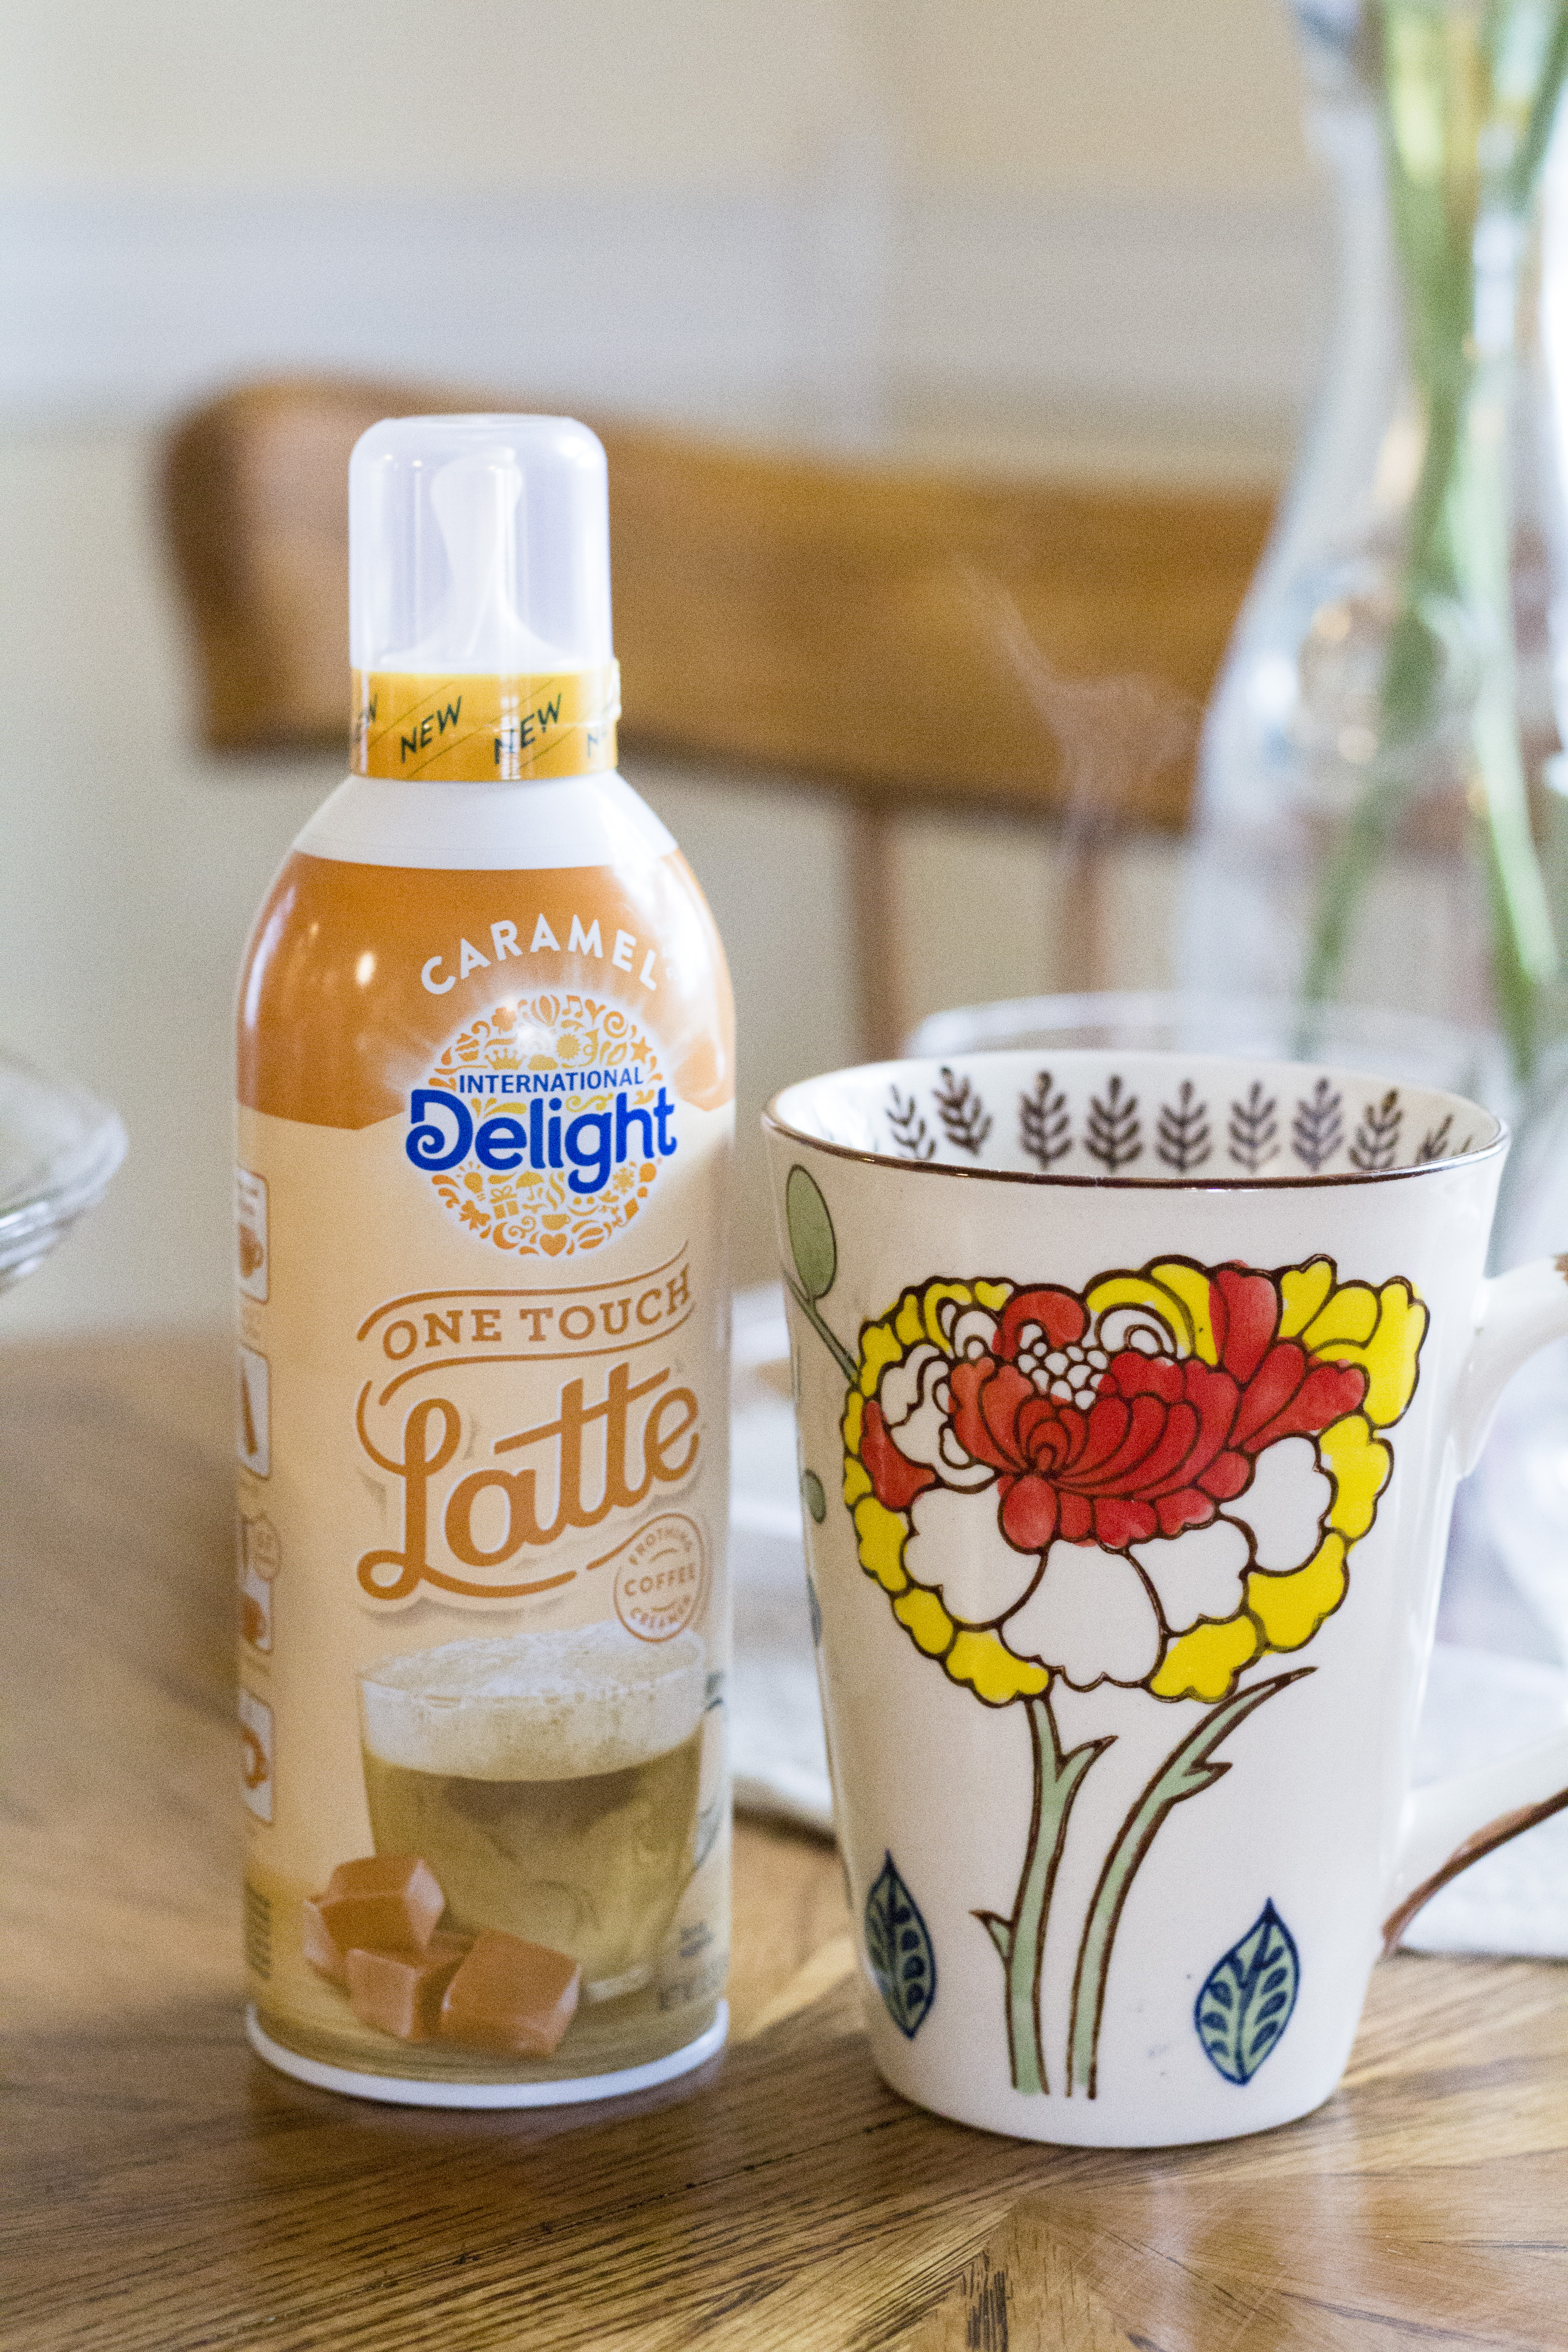 International Delight One-Touch Latte First Impression